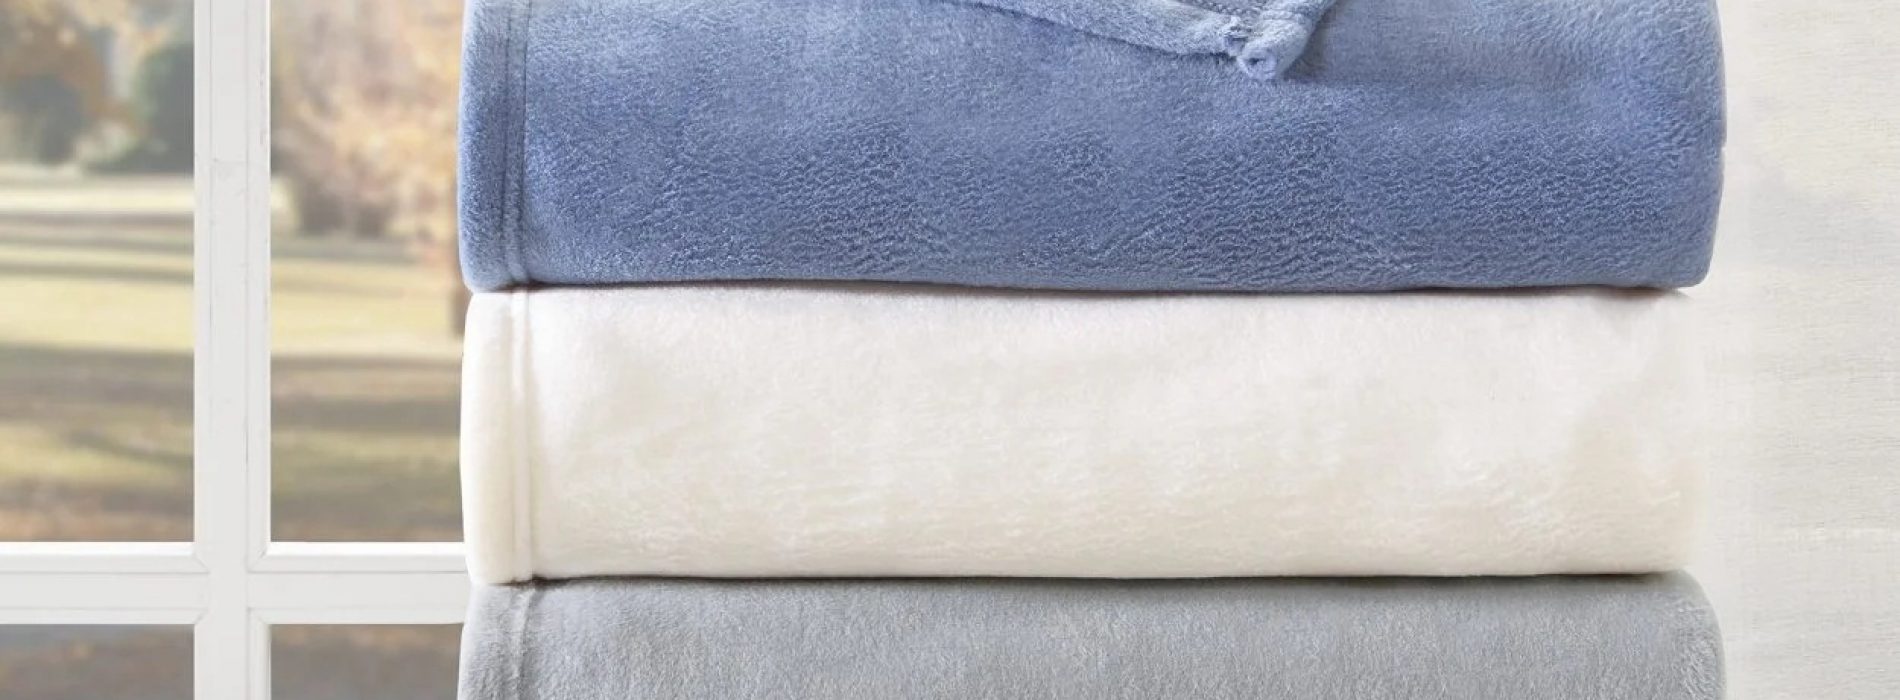 What Are The Uses Of A Fleece Blanket?